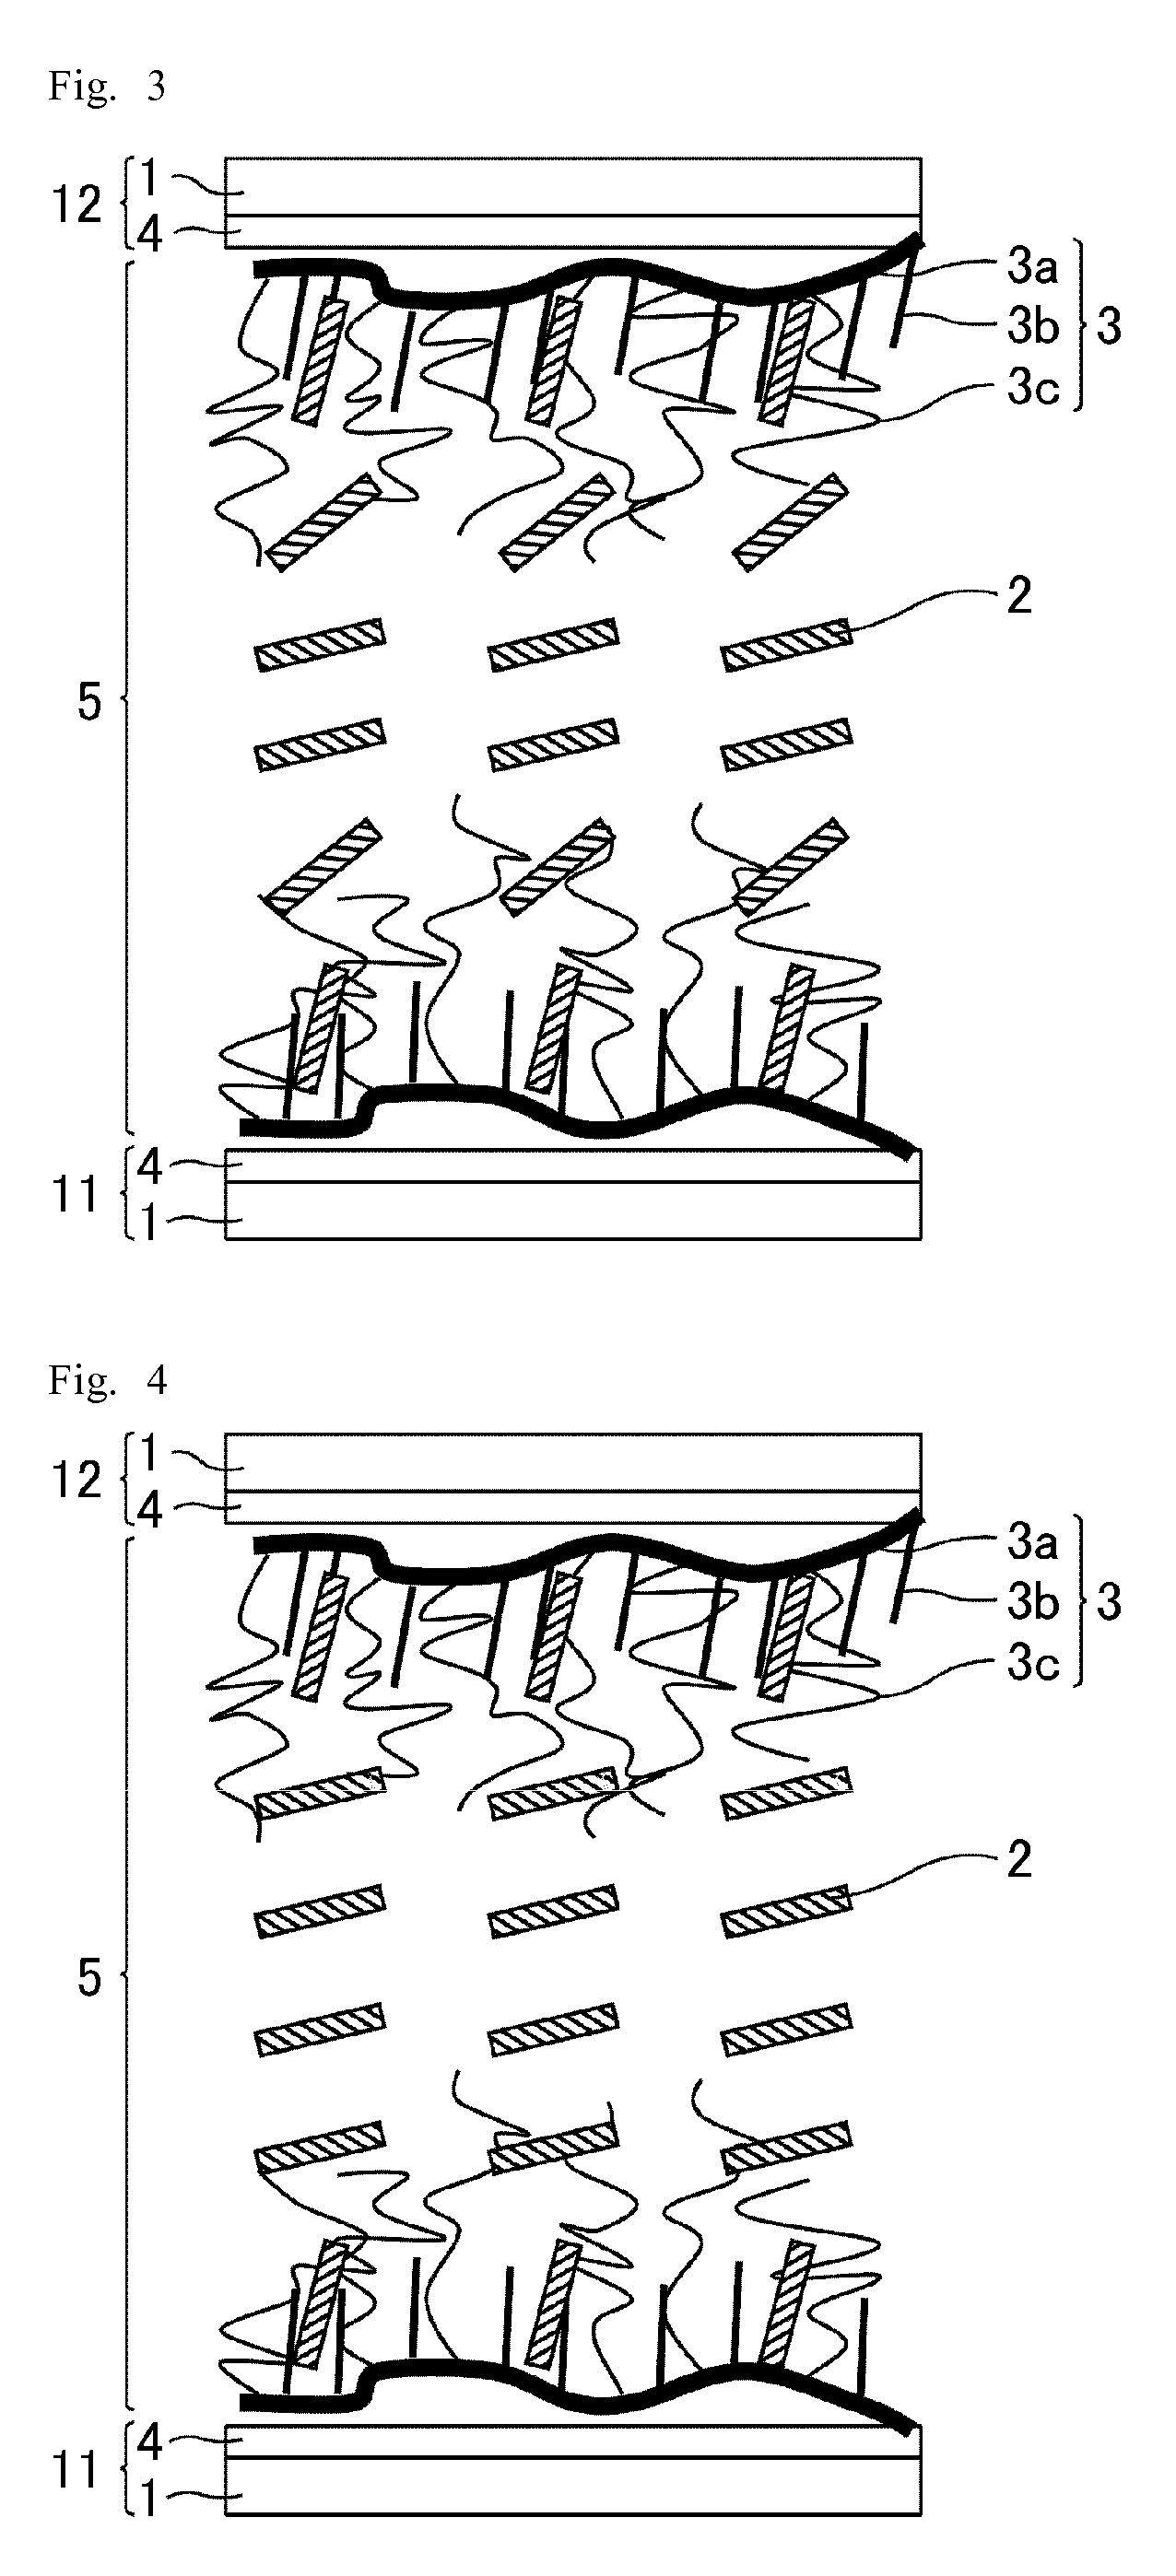 Liquid-crystal display device, process for producing liquid-crystal display device, and composition for forming alignment film